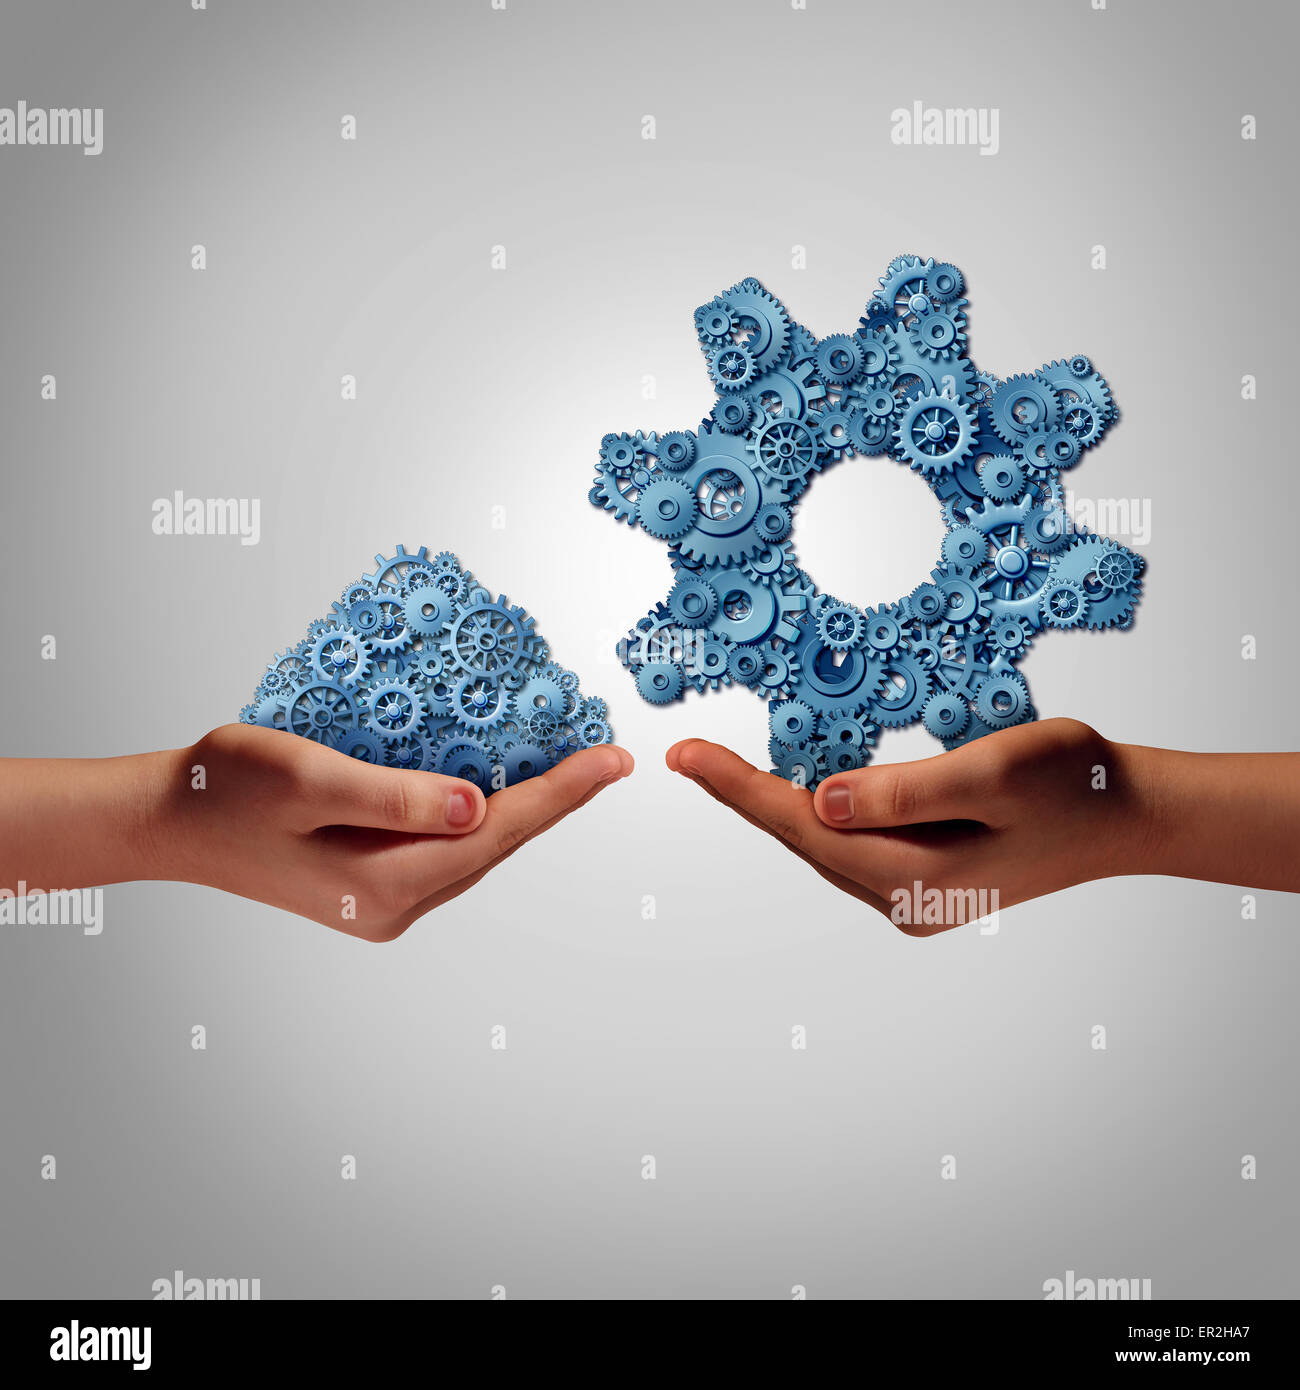 Technology management concept as a hand holding a group of mixed disorganized gears and cogs with another person presenting the Stock Photo